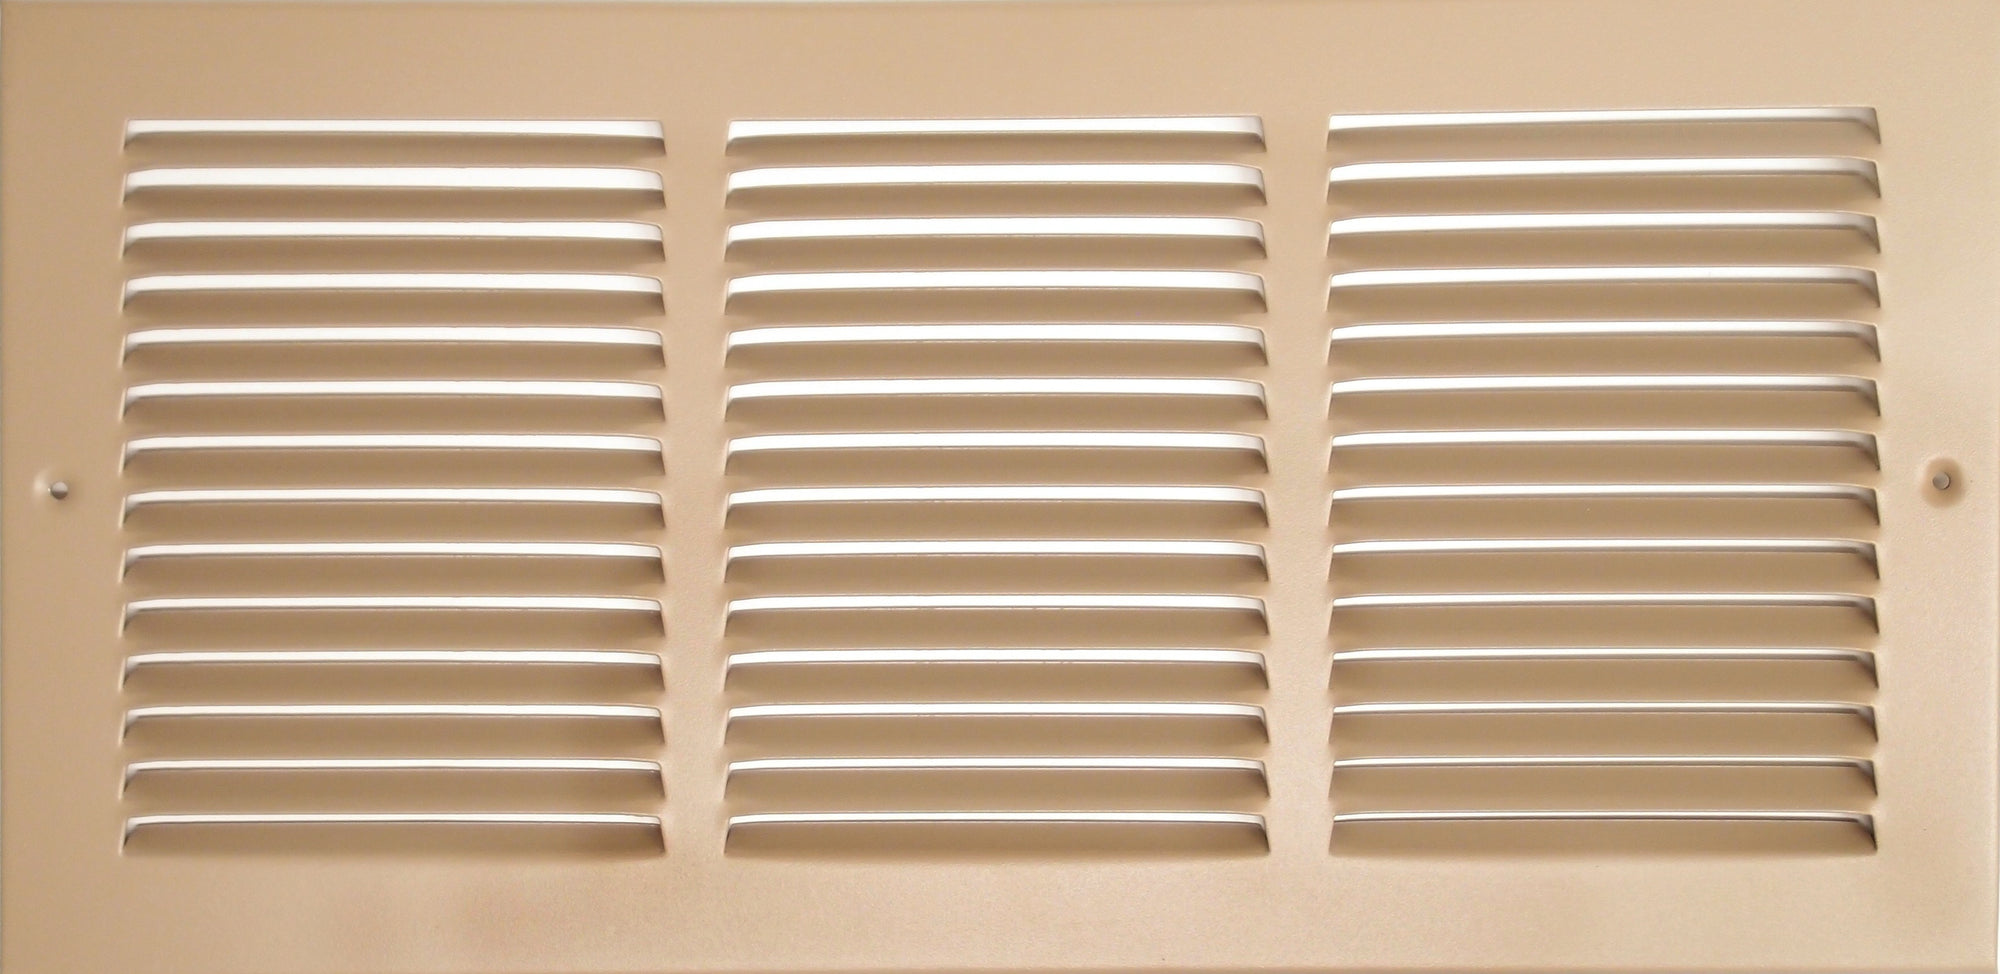 24" X 10" Air Vent Return Grilles - Sidewall and Ceiling - Steel